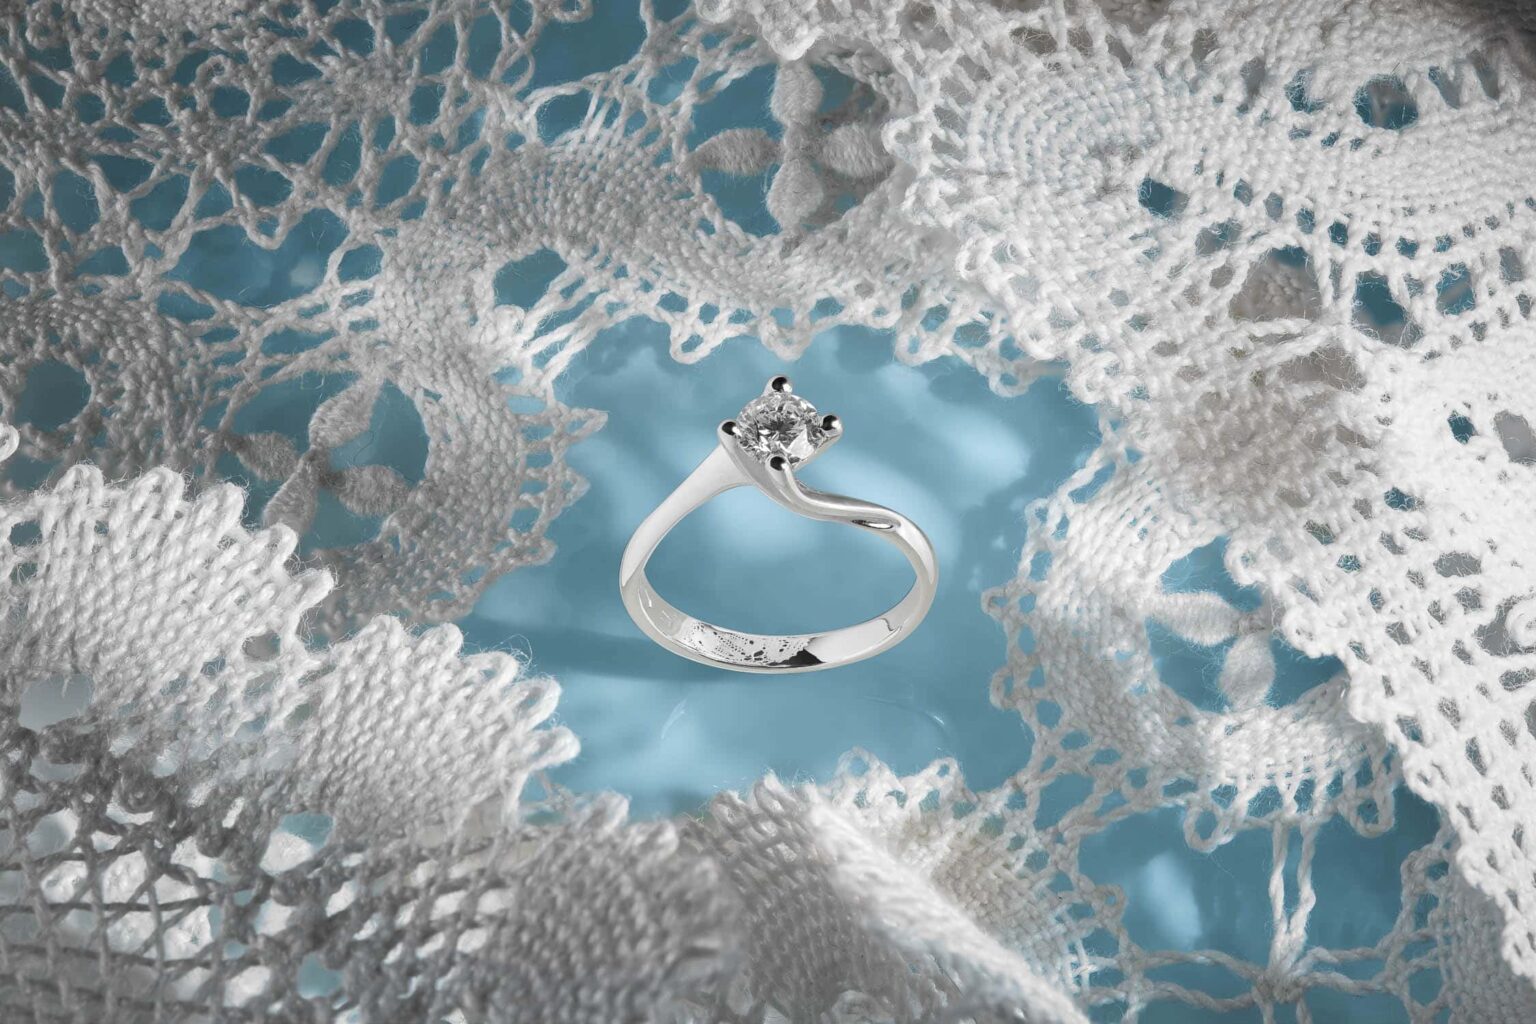 Creative Jewelry Photography with Ring on White Lace